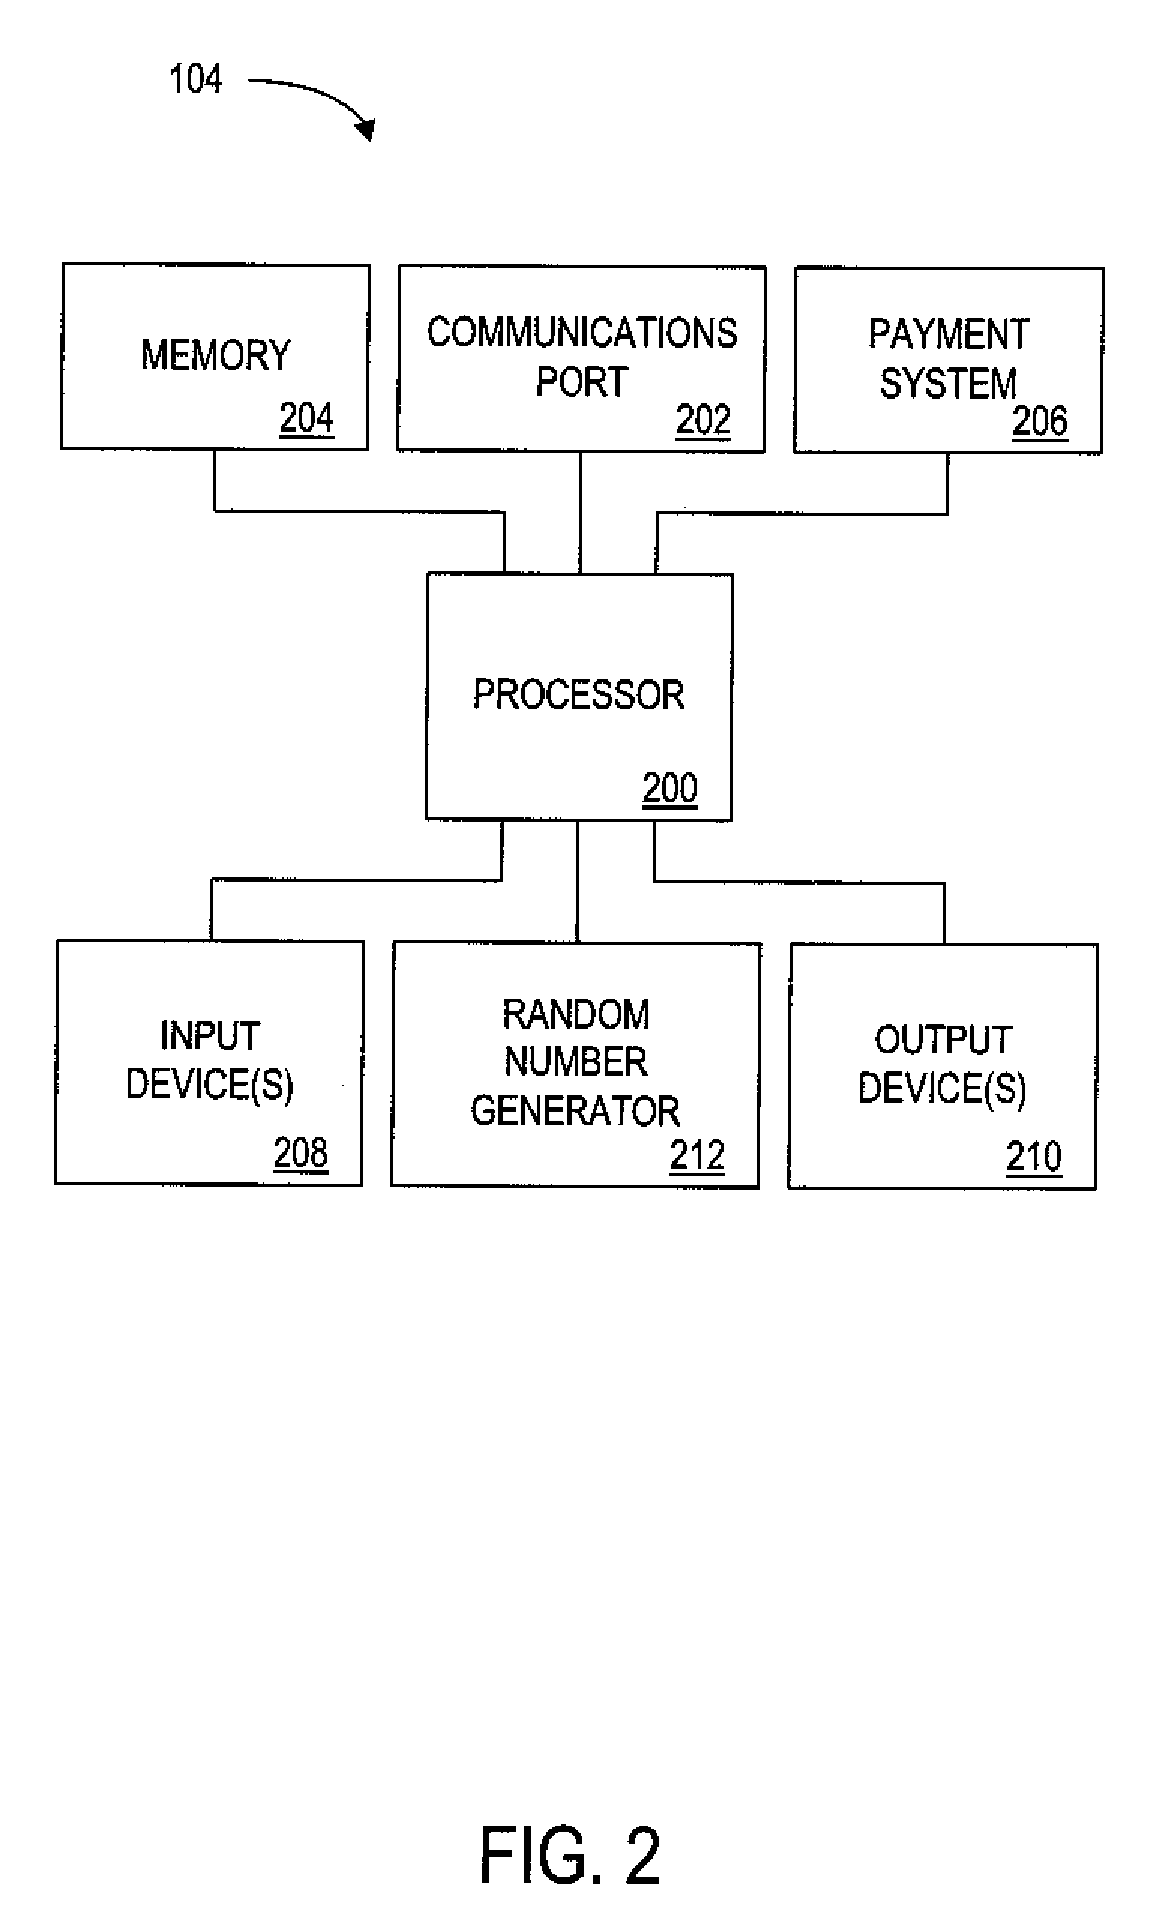 Apparatus and methods for facilitating automated play of game machine